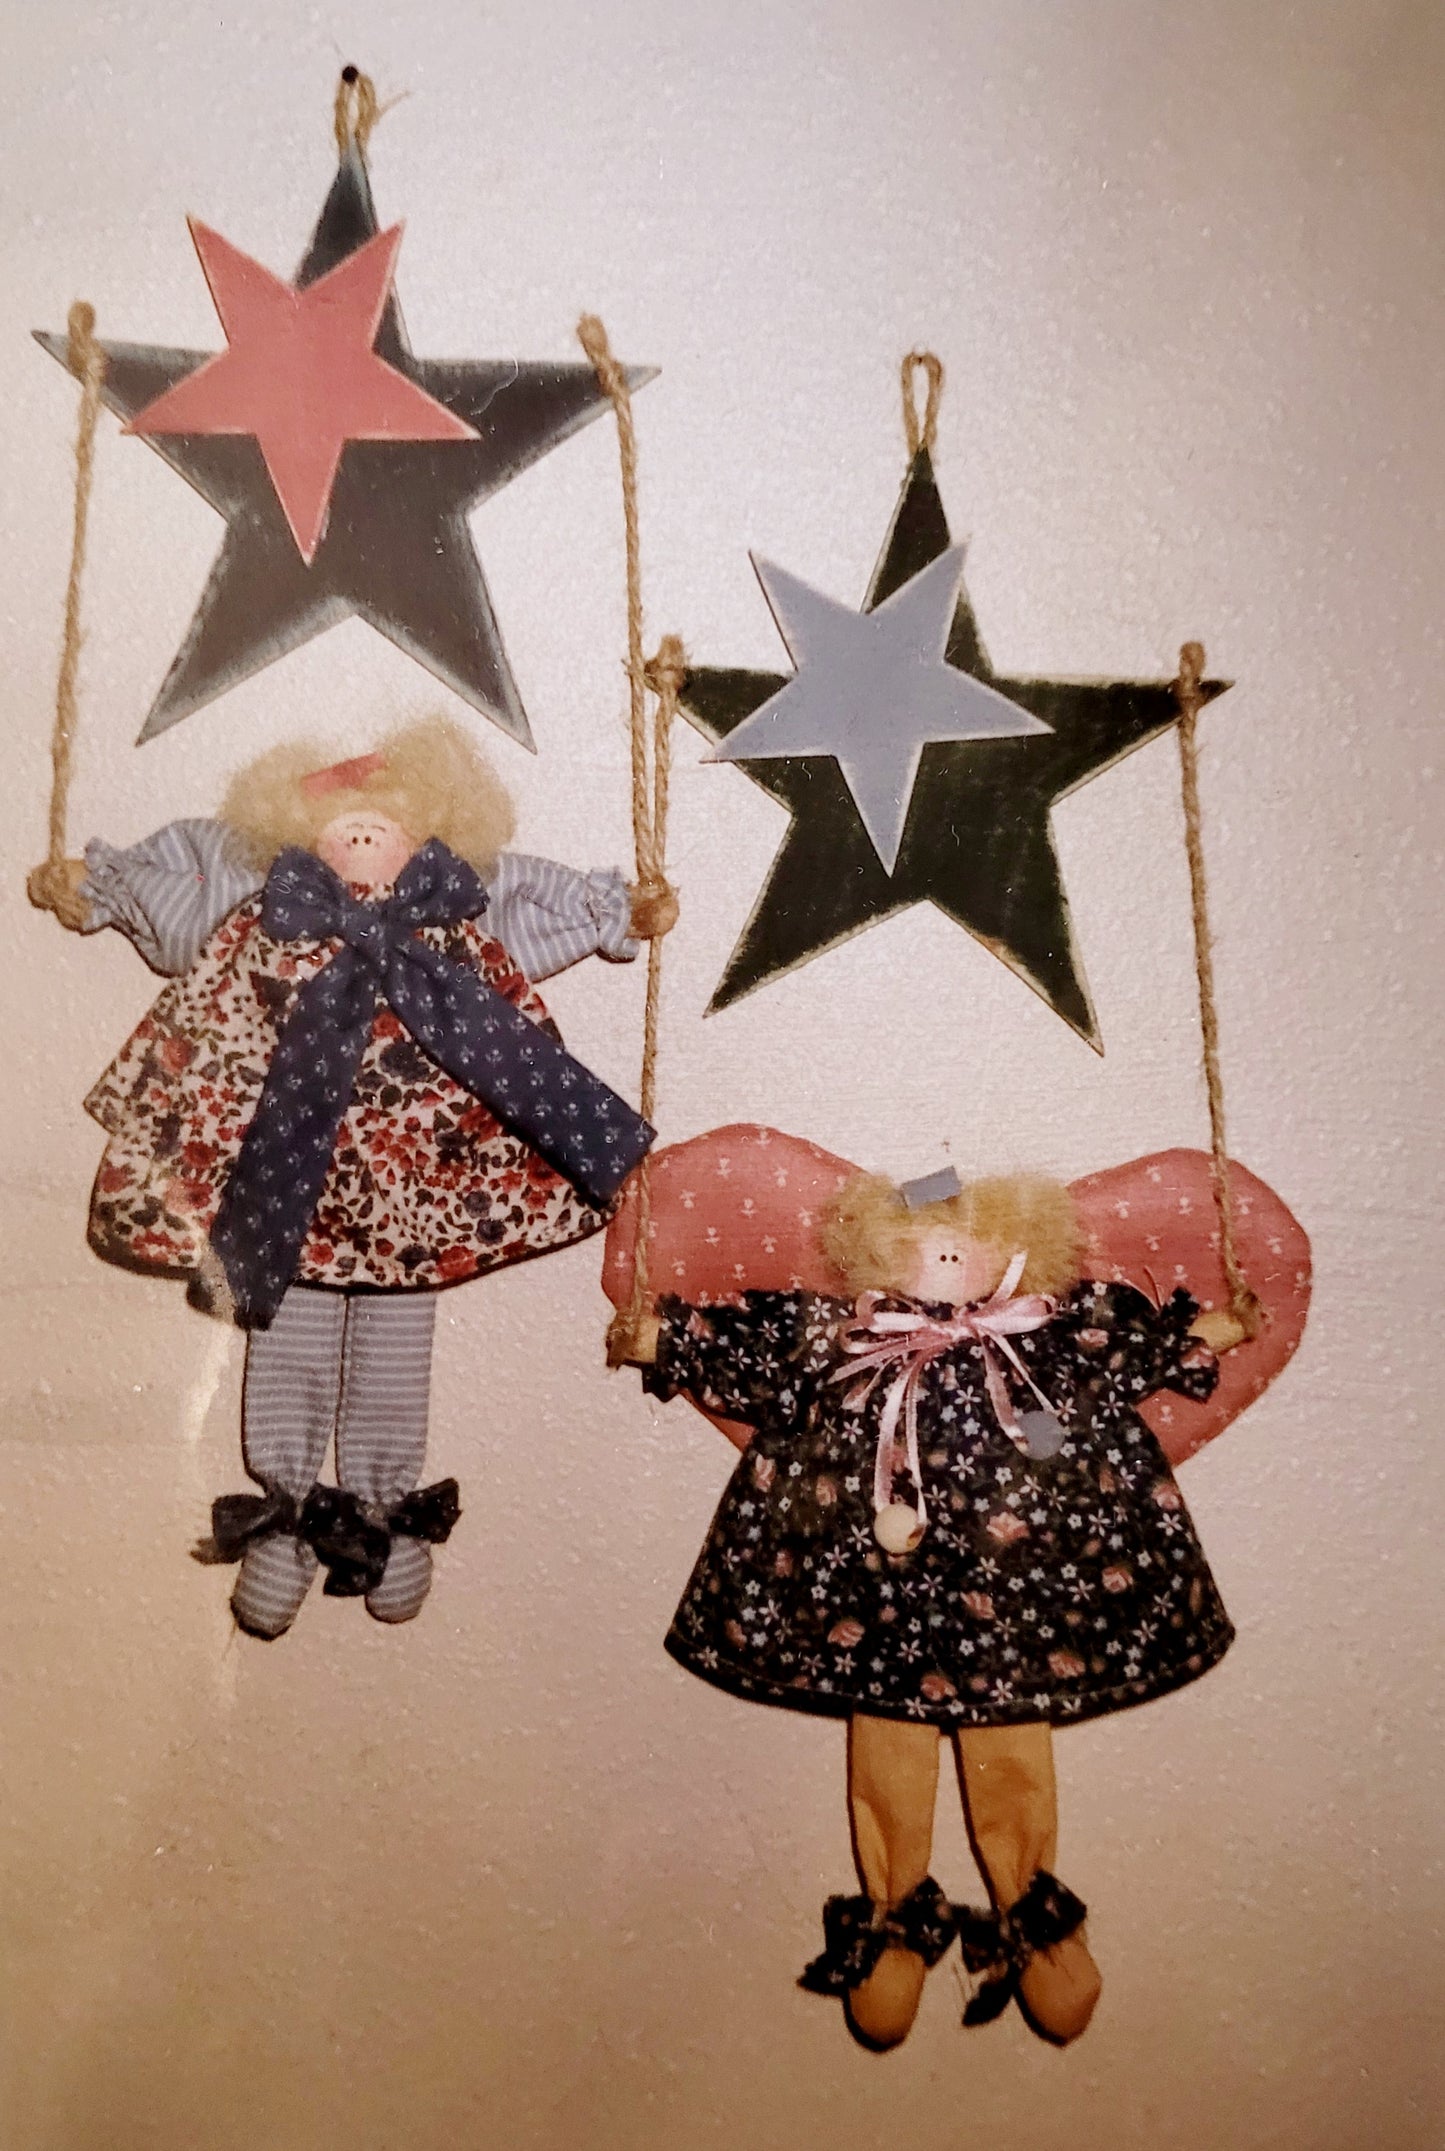 "Wood'n'Yarn Collectables" (Falling Stars 12.5" Hanging Doll) #115 @1992